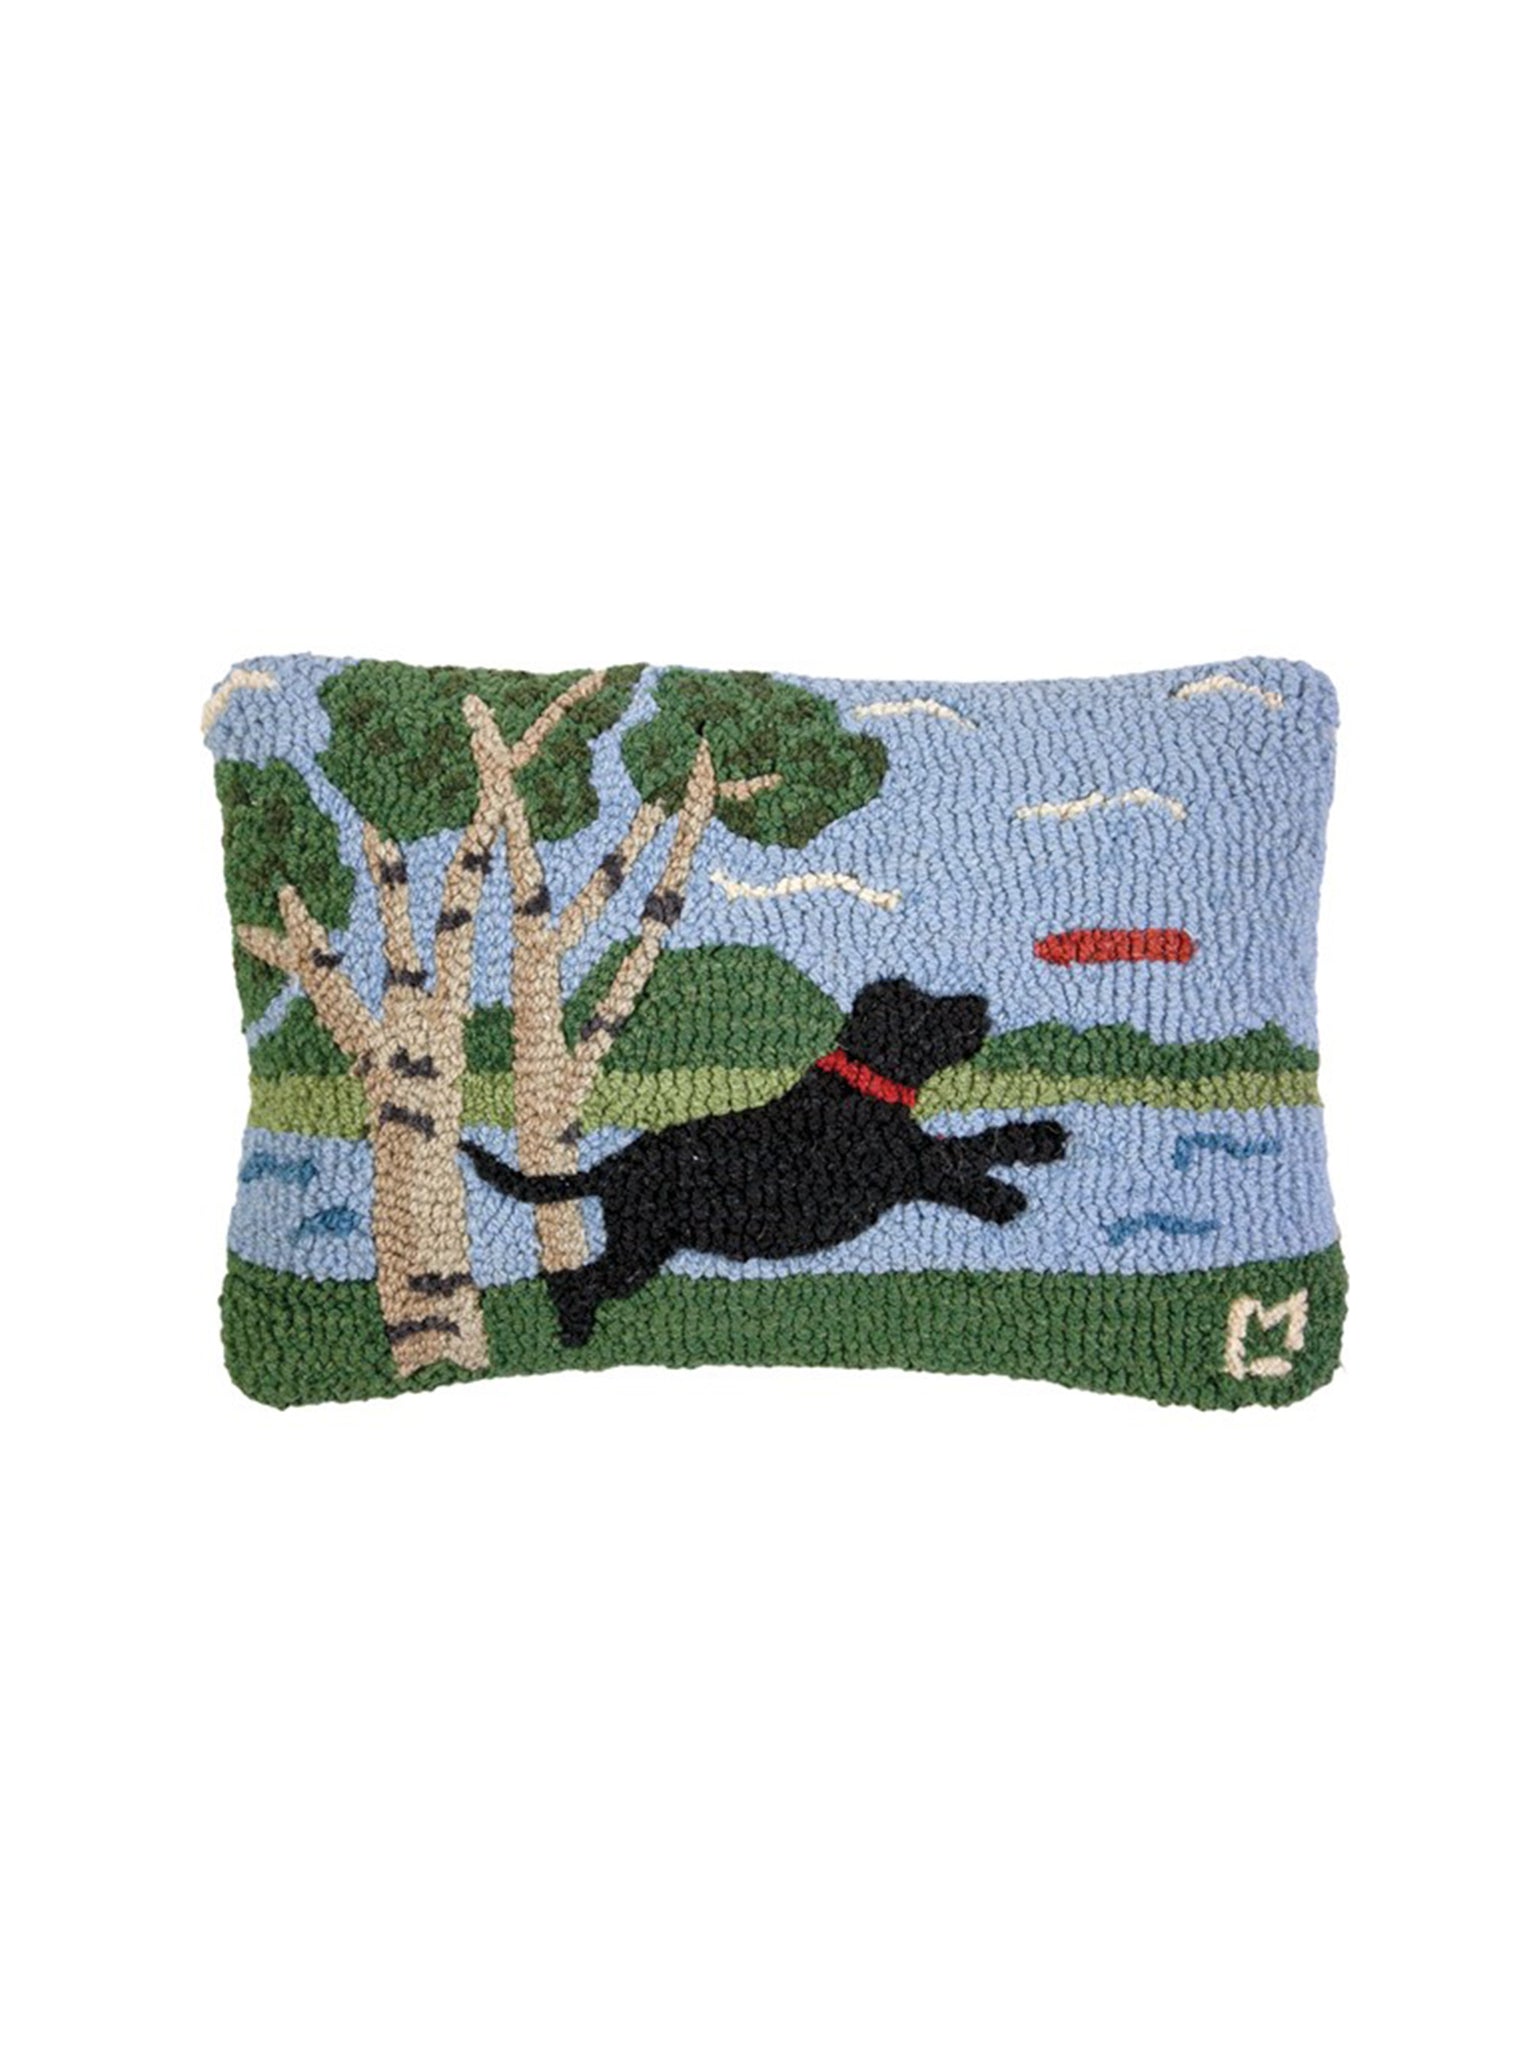 Play Day at the Park Hooked Wool Pillow Weston Table